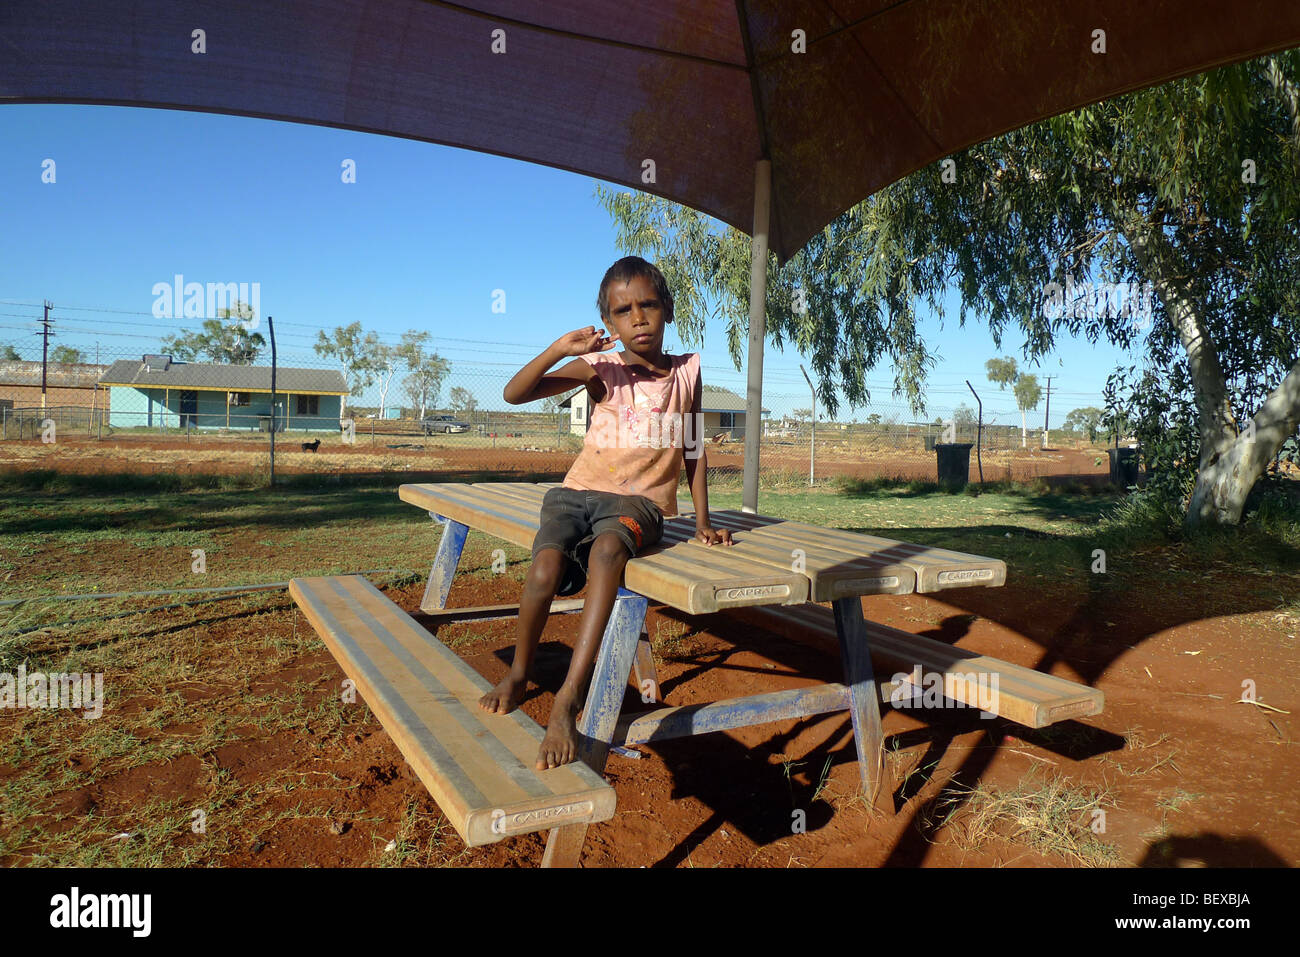 Aboriginal child in the Australian outback, Murray Downs, Northern Territory, Australia. Stock Photo